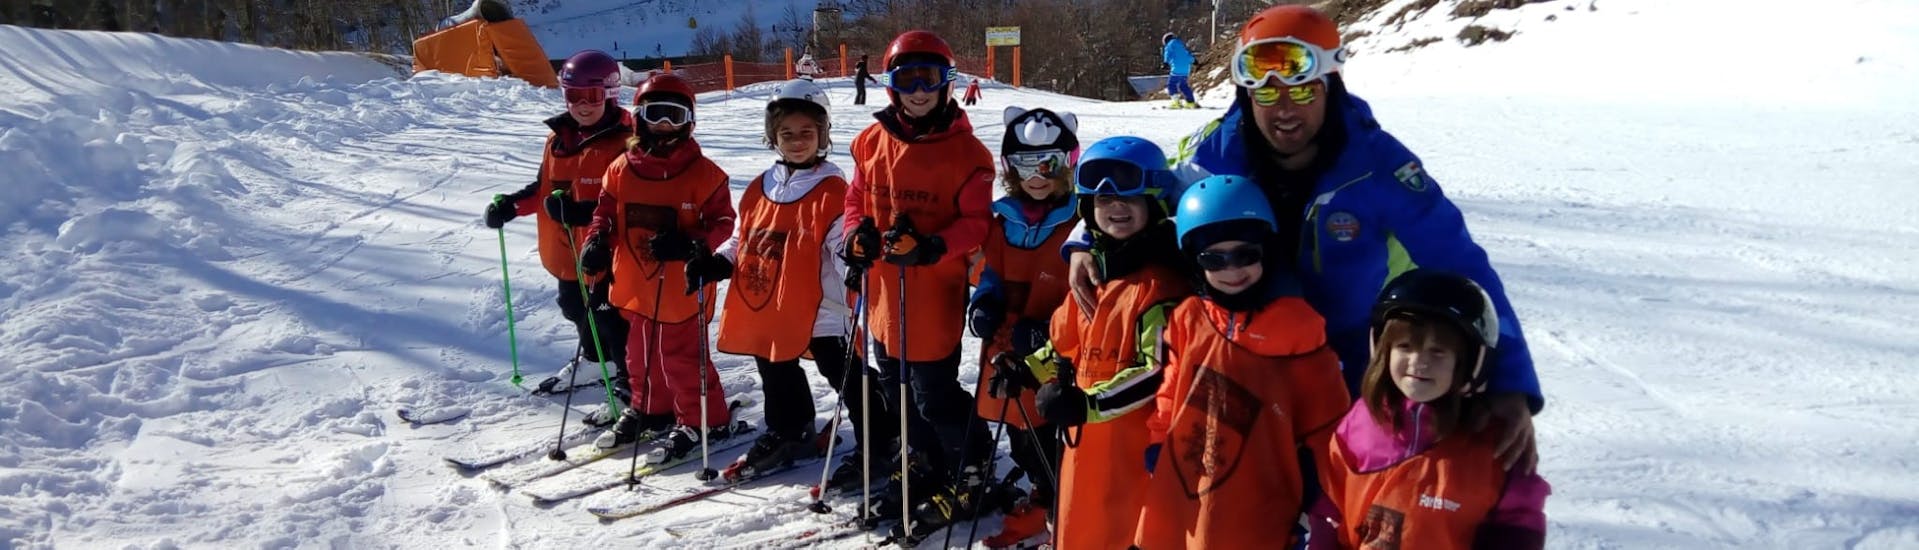 Kids and ski instructor enjoying their time during one of the kids ski lessons for all levels in Roccaraso.